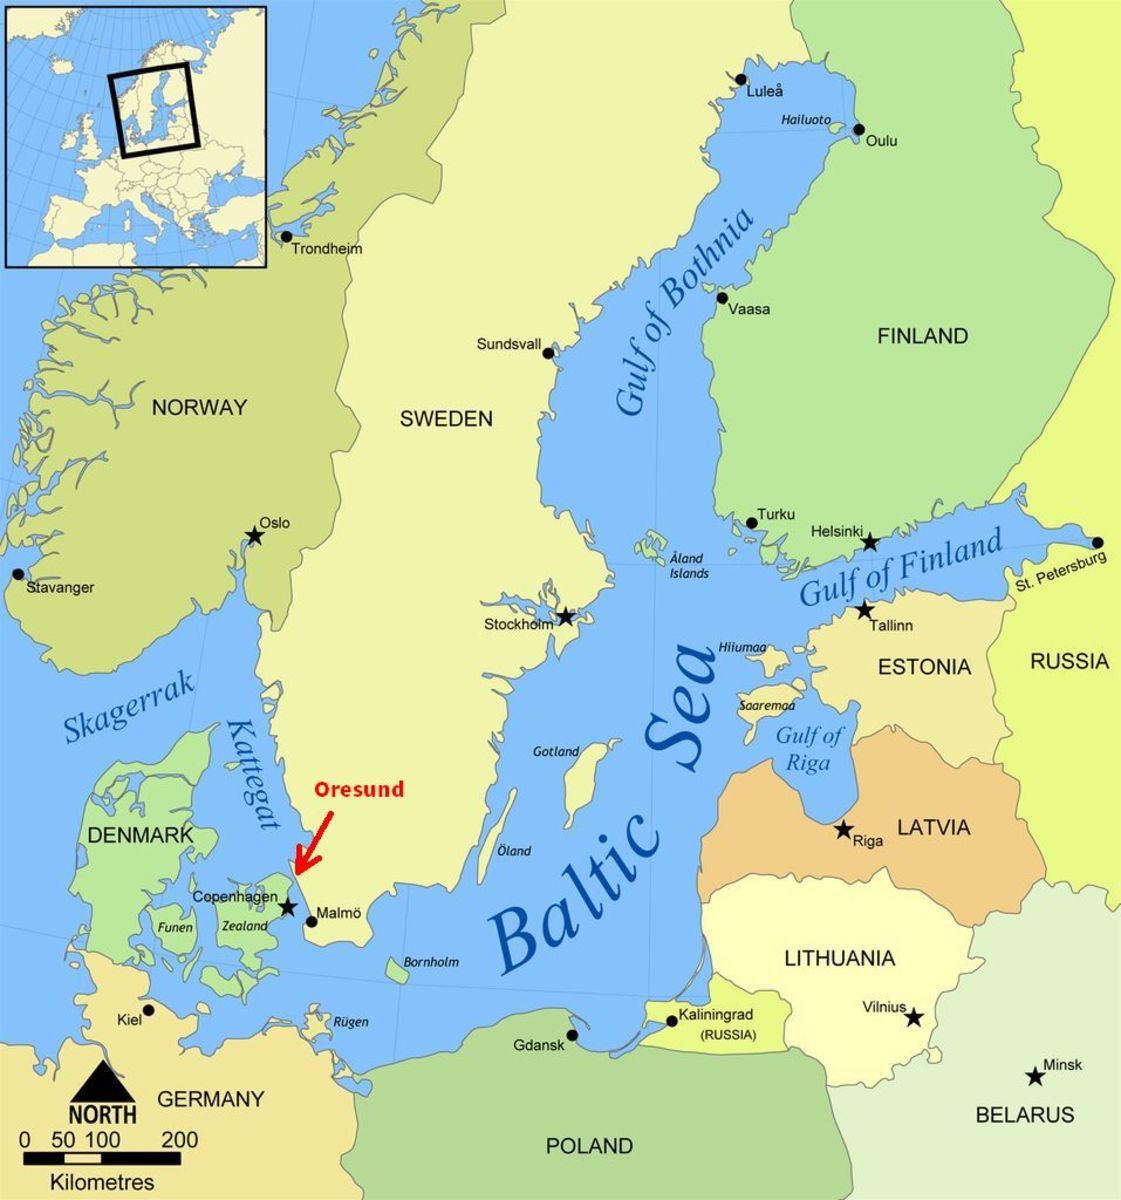 The Baltic Sea, showing the narrowest part of the Oresund in the Denmark Straits.